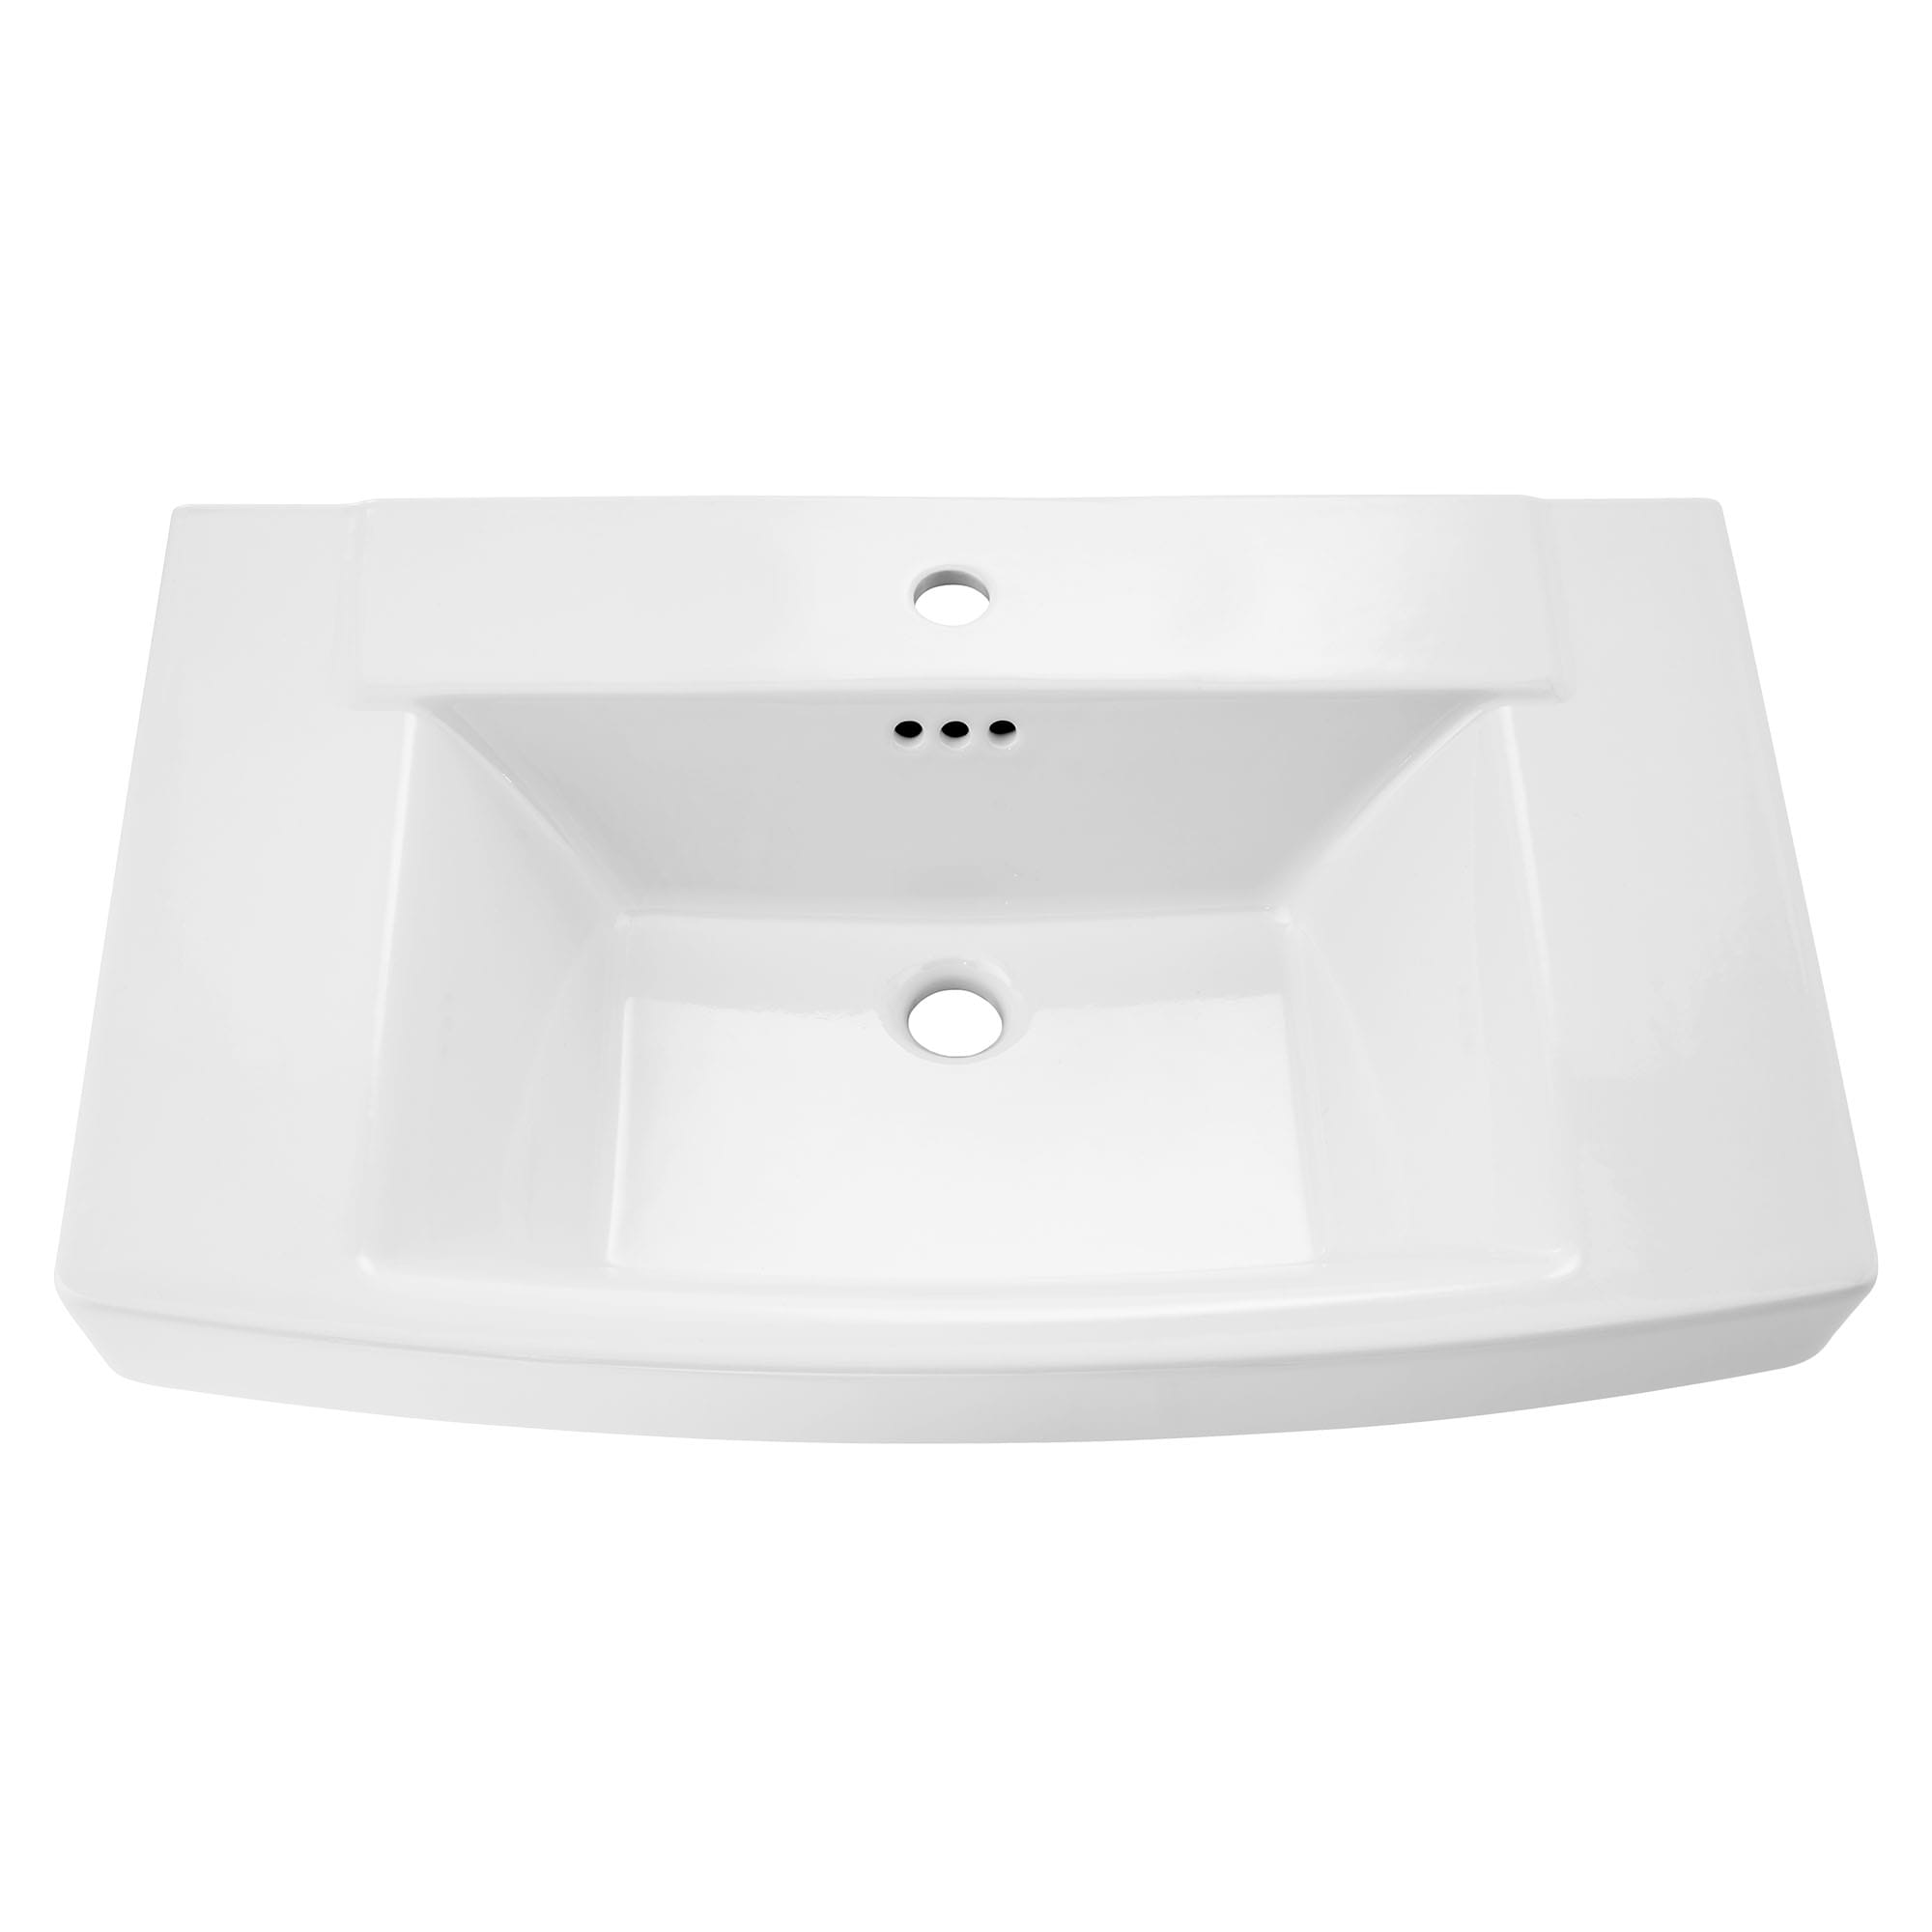 Townsend Center Hole Only Pedestal Sink Top WHITE